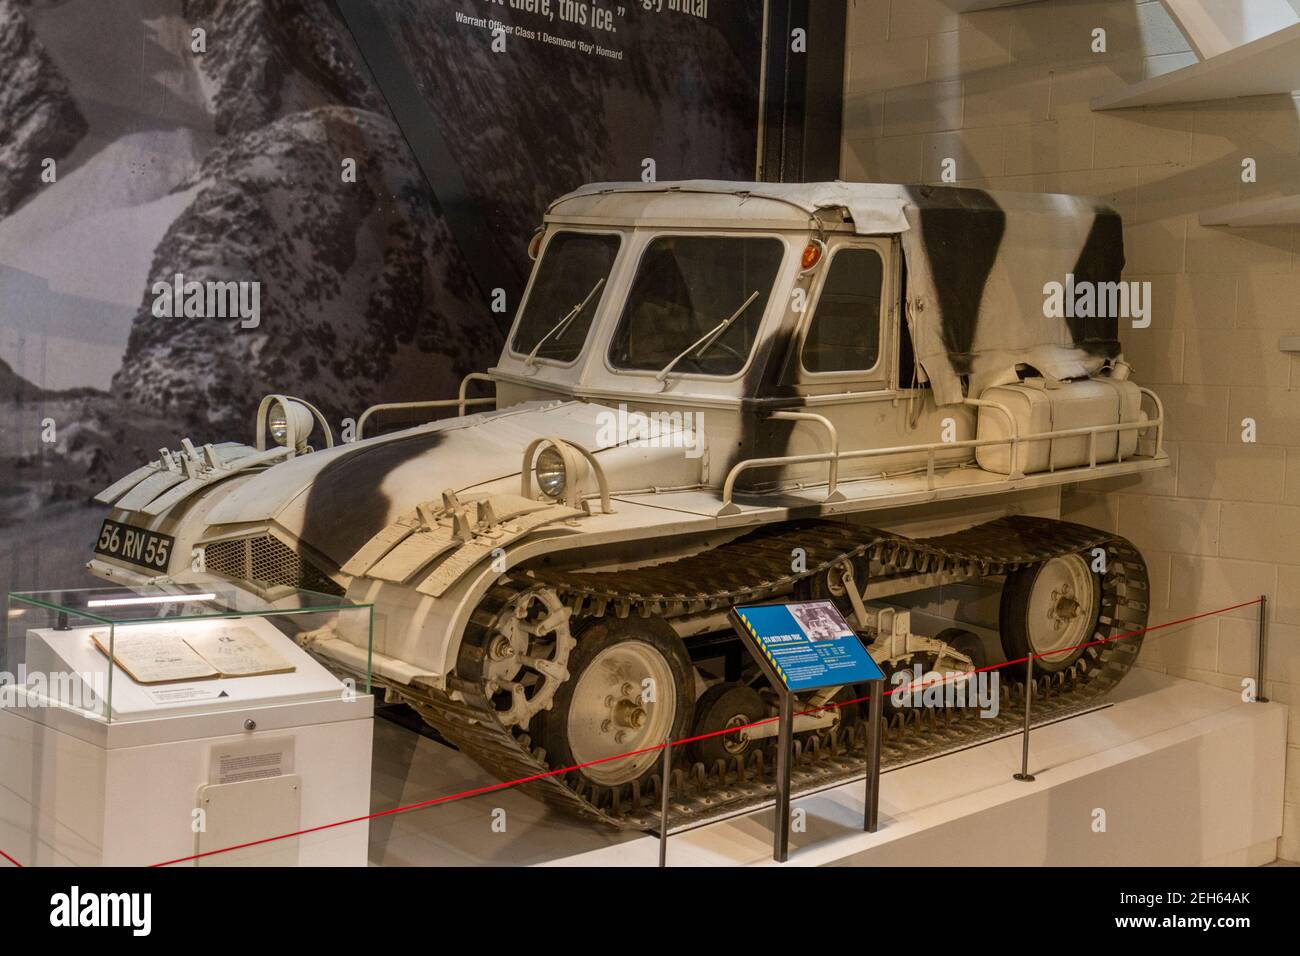 A ST4 Aktiv snow-trac in the REME Museum (Royal Electrical and Mechanical Engineers), Lyneham, Wiltshire, UK. Stock Photo